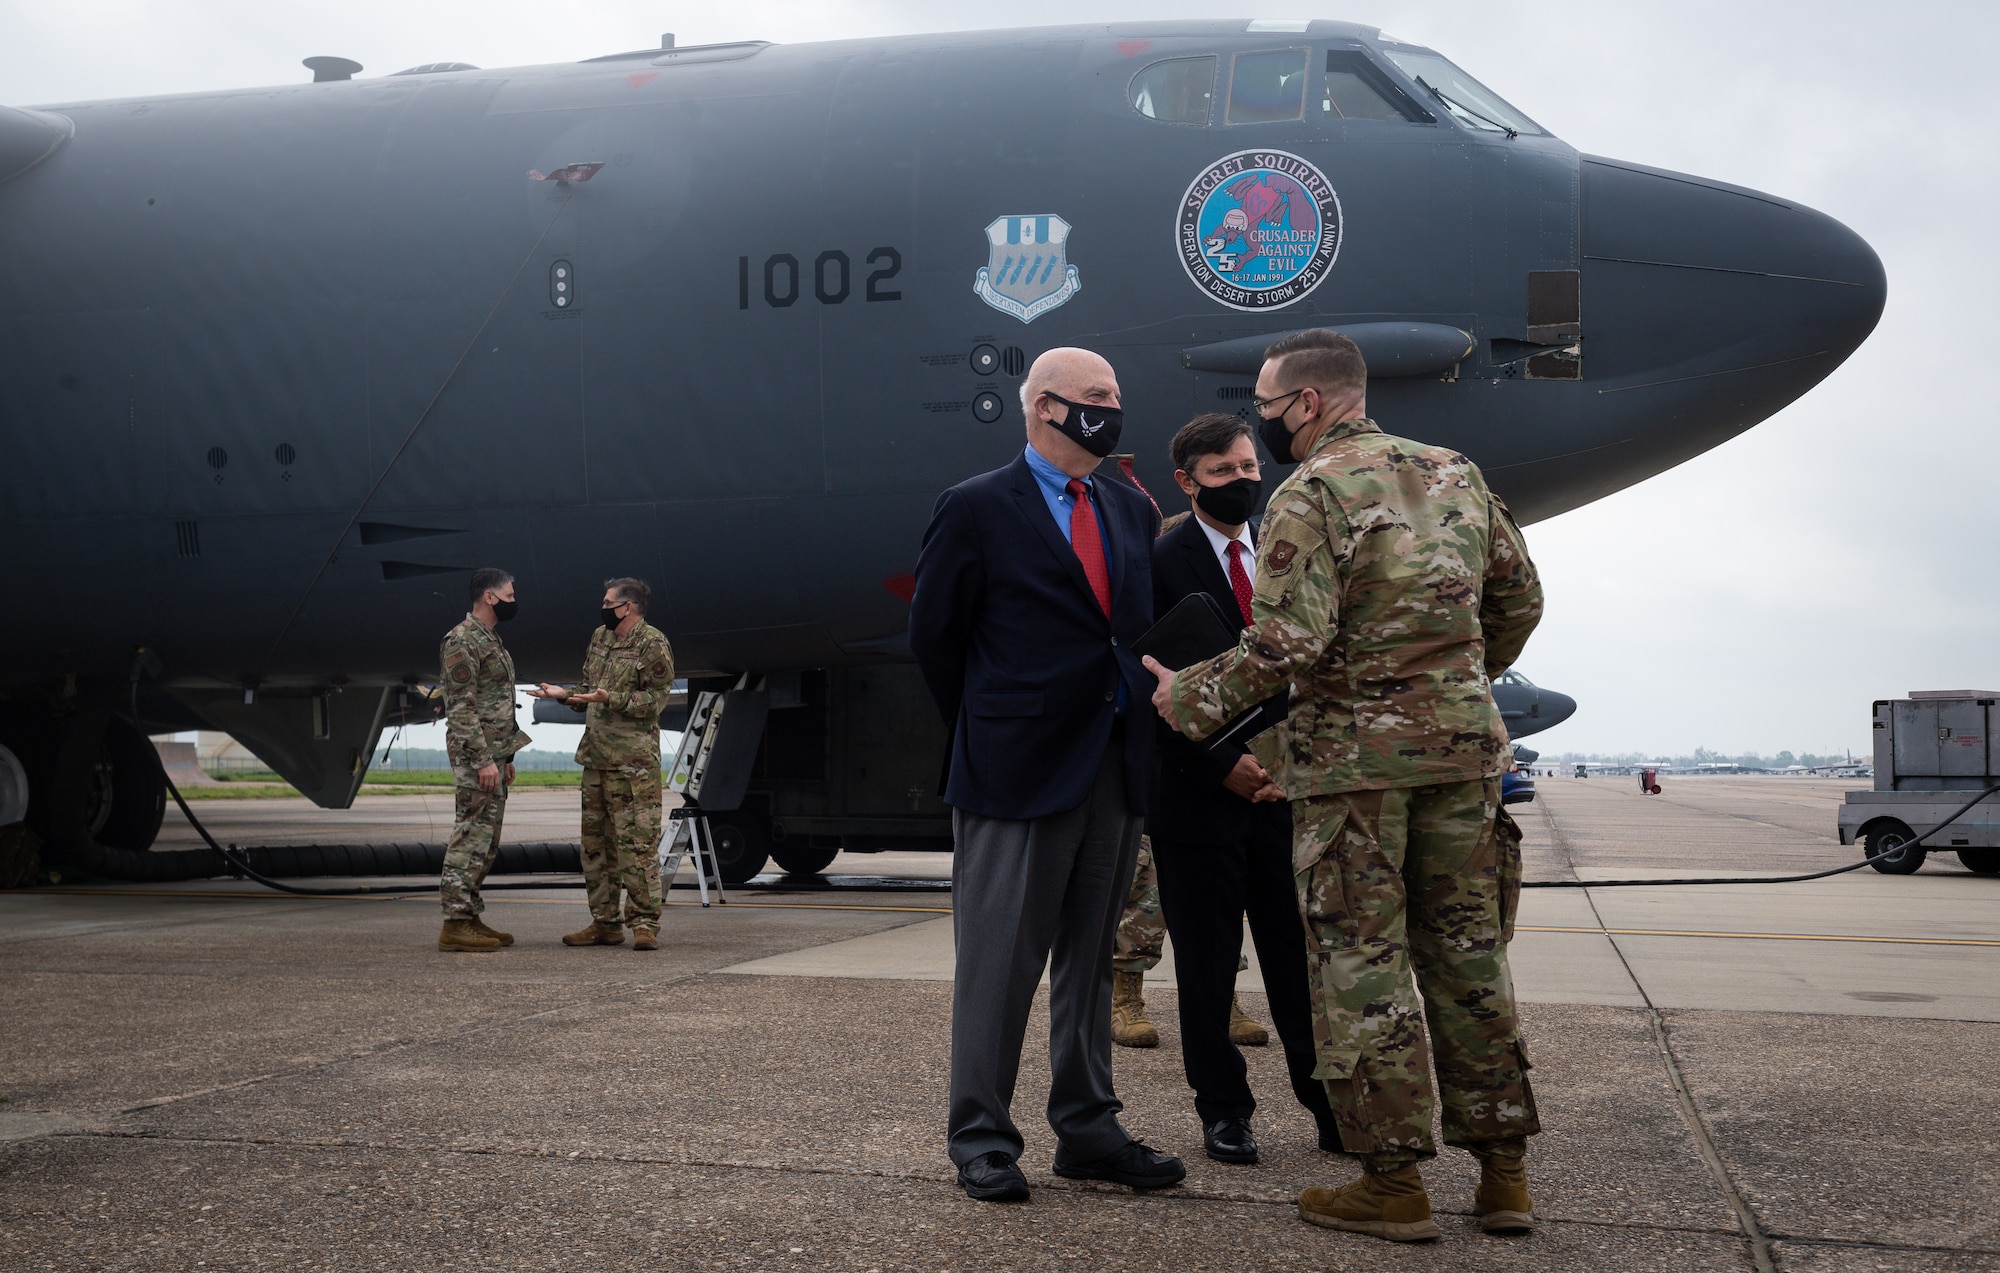 Rep. Mike Johnson, 4th Congressional District of Louisiana congressman, and Honorable John P. Roth, acting Secretary of the Air Force, are briefed by Chief Master Sgt. Brent T. Chadick, 2nd Bomb Wing command chief, during a tour at Barksdale Air Force Base, Louisiana, April 6, 2021.